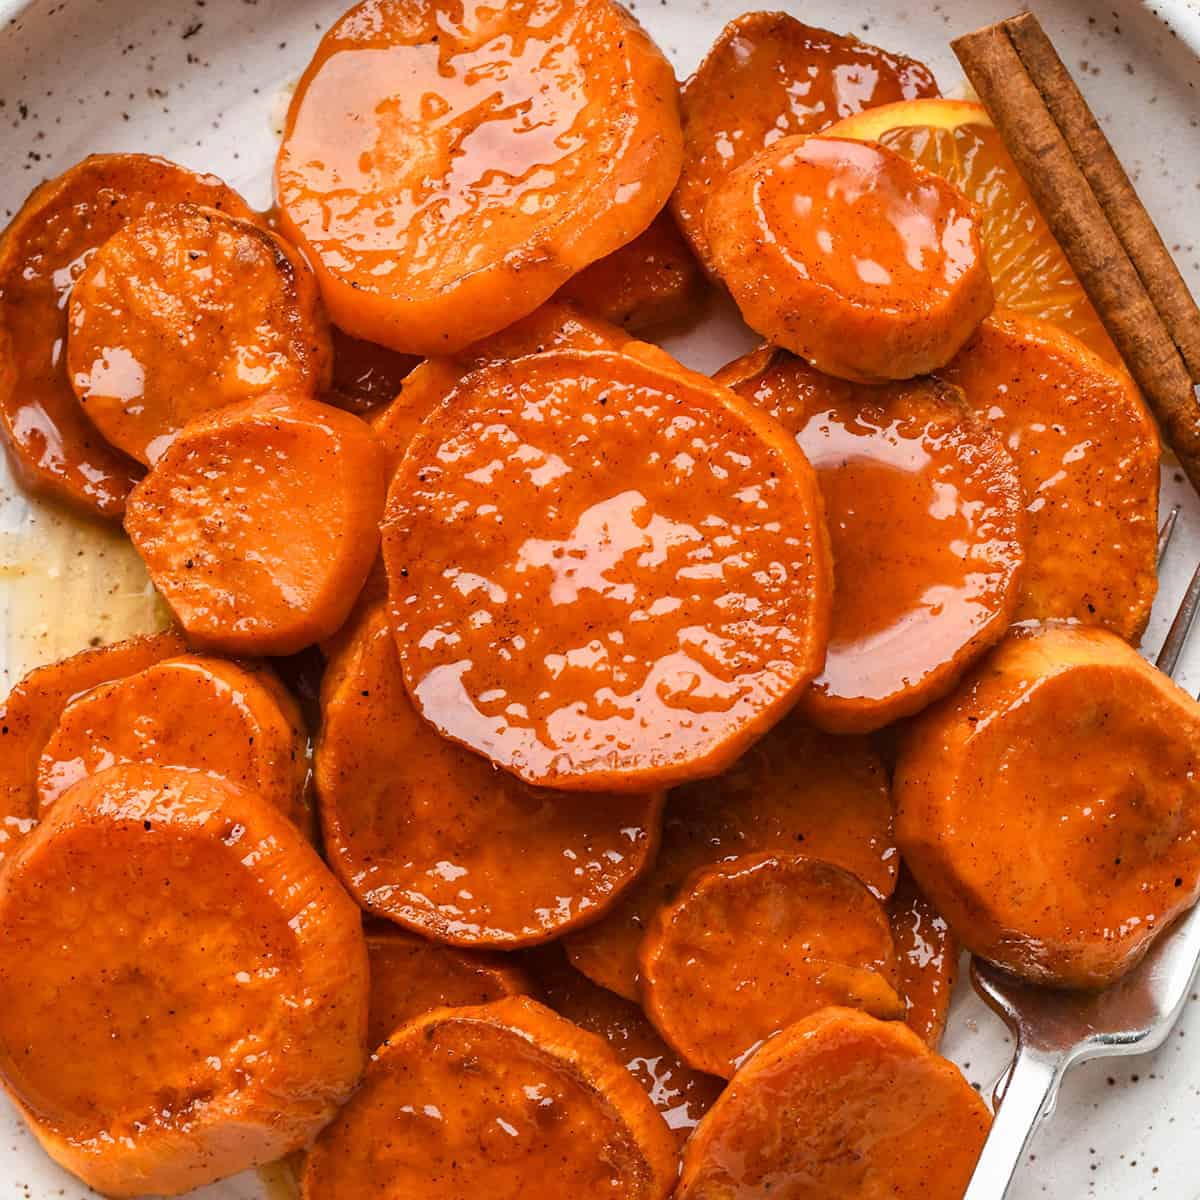 Candied Yams on a plate with a fork